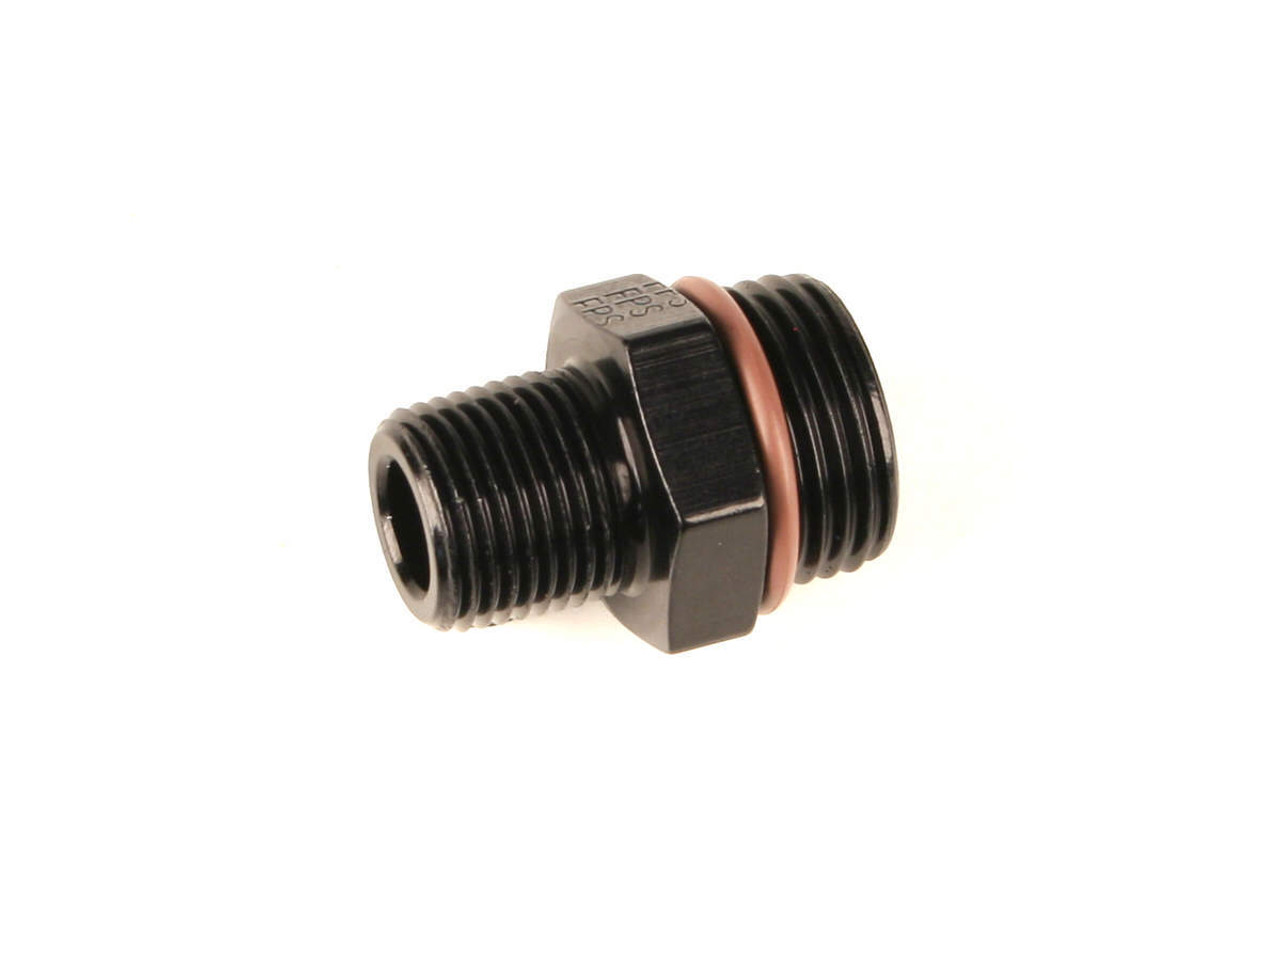 Fragola #10 ORB x 3/8 MPT Adapter Fitting Black